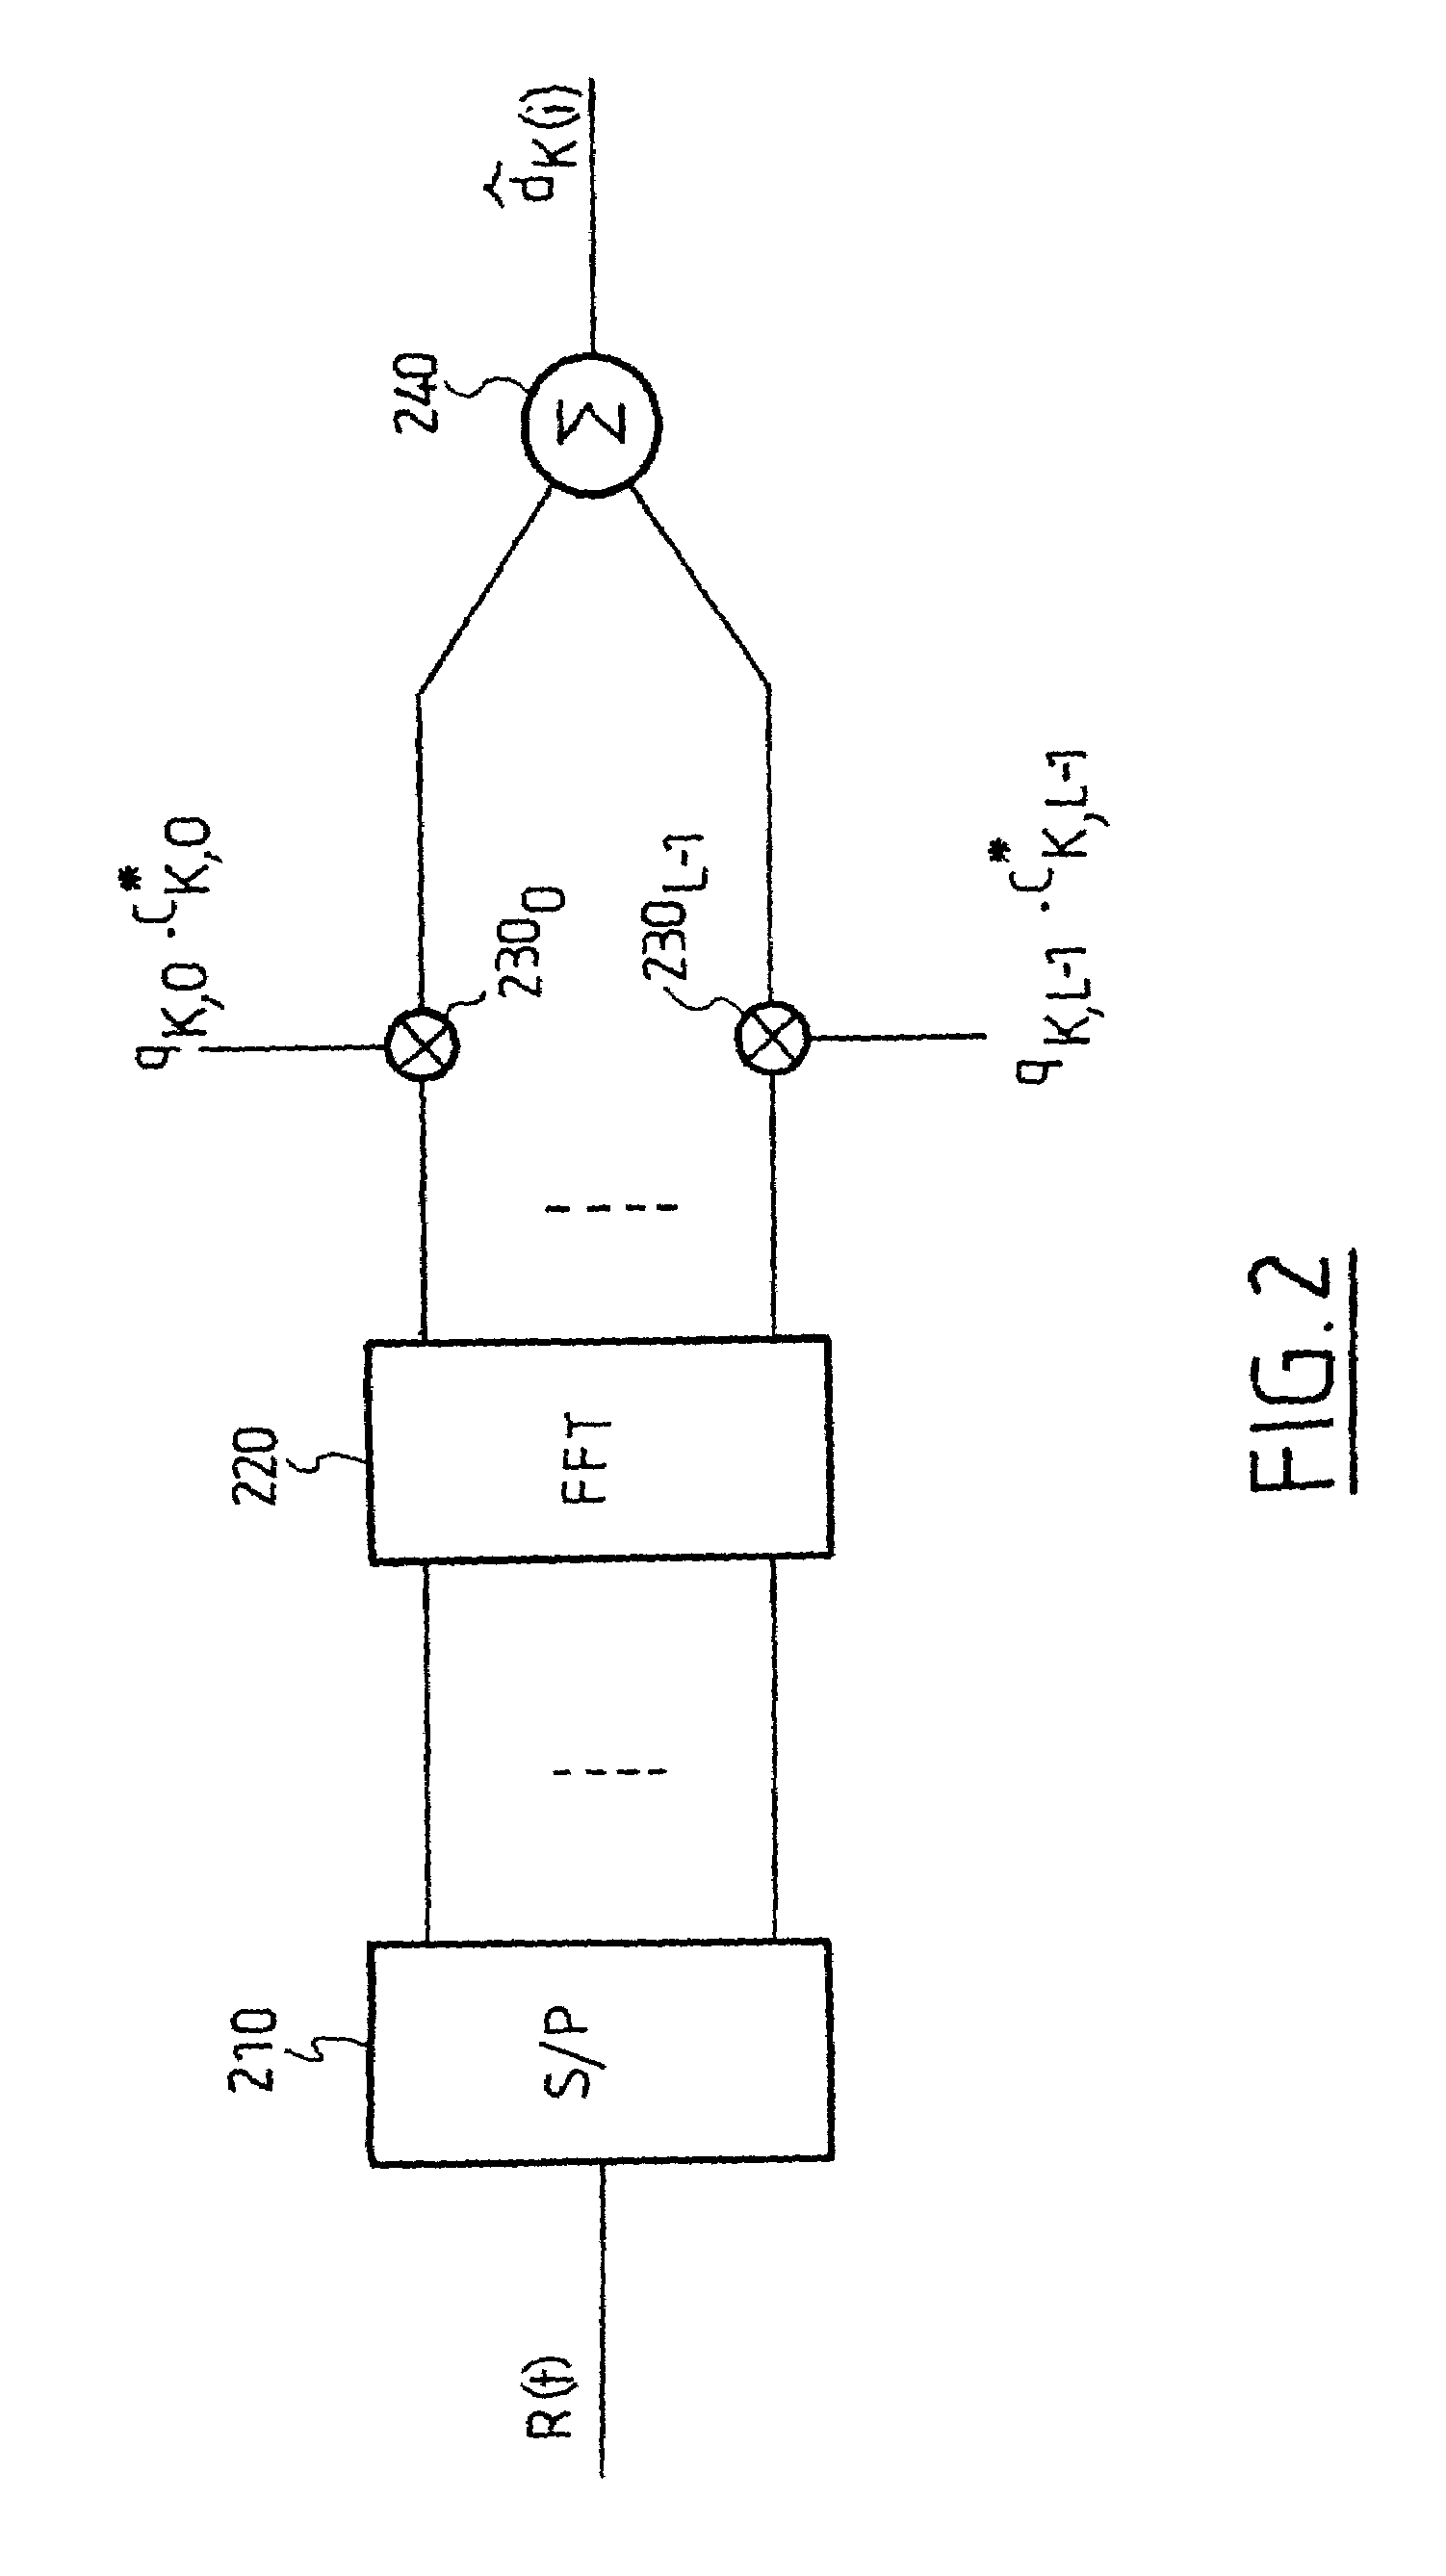 Multiuser detection method and device